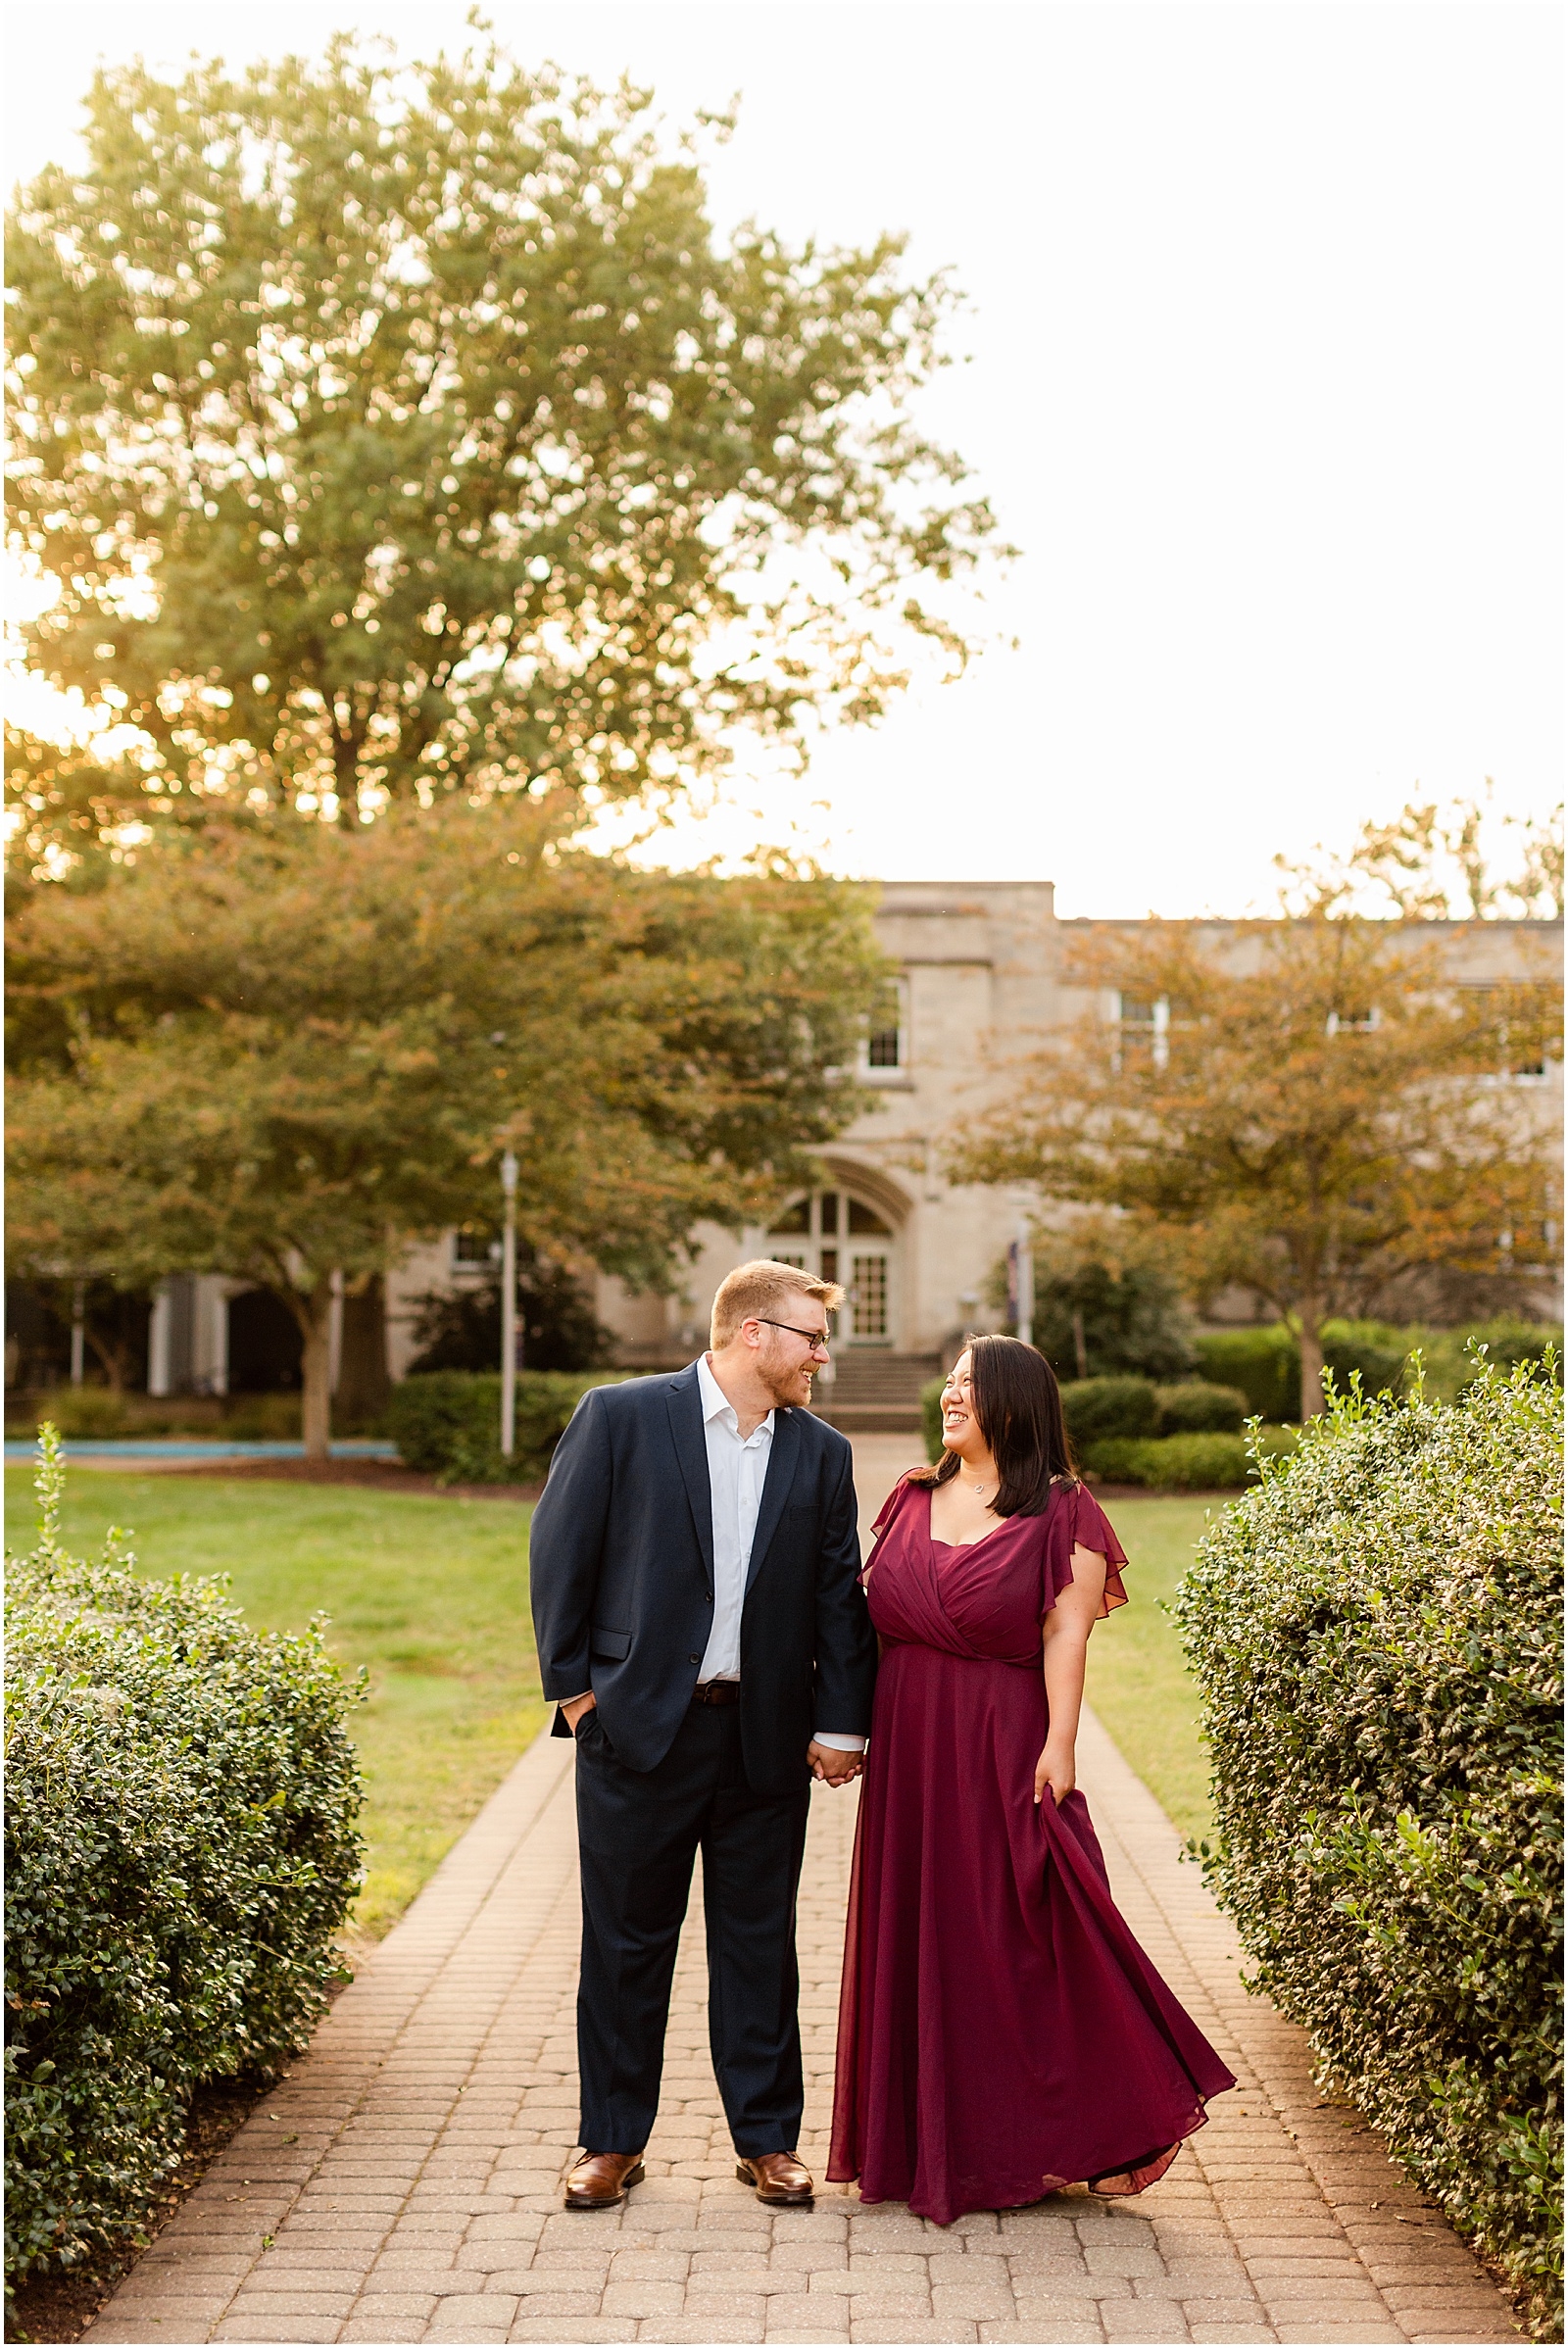 Mariah and Andrew's Session at U of E | Bret and Brandie Photography0016.jpg